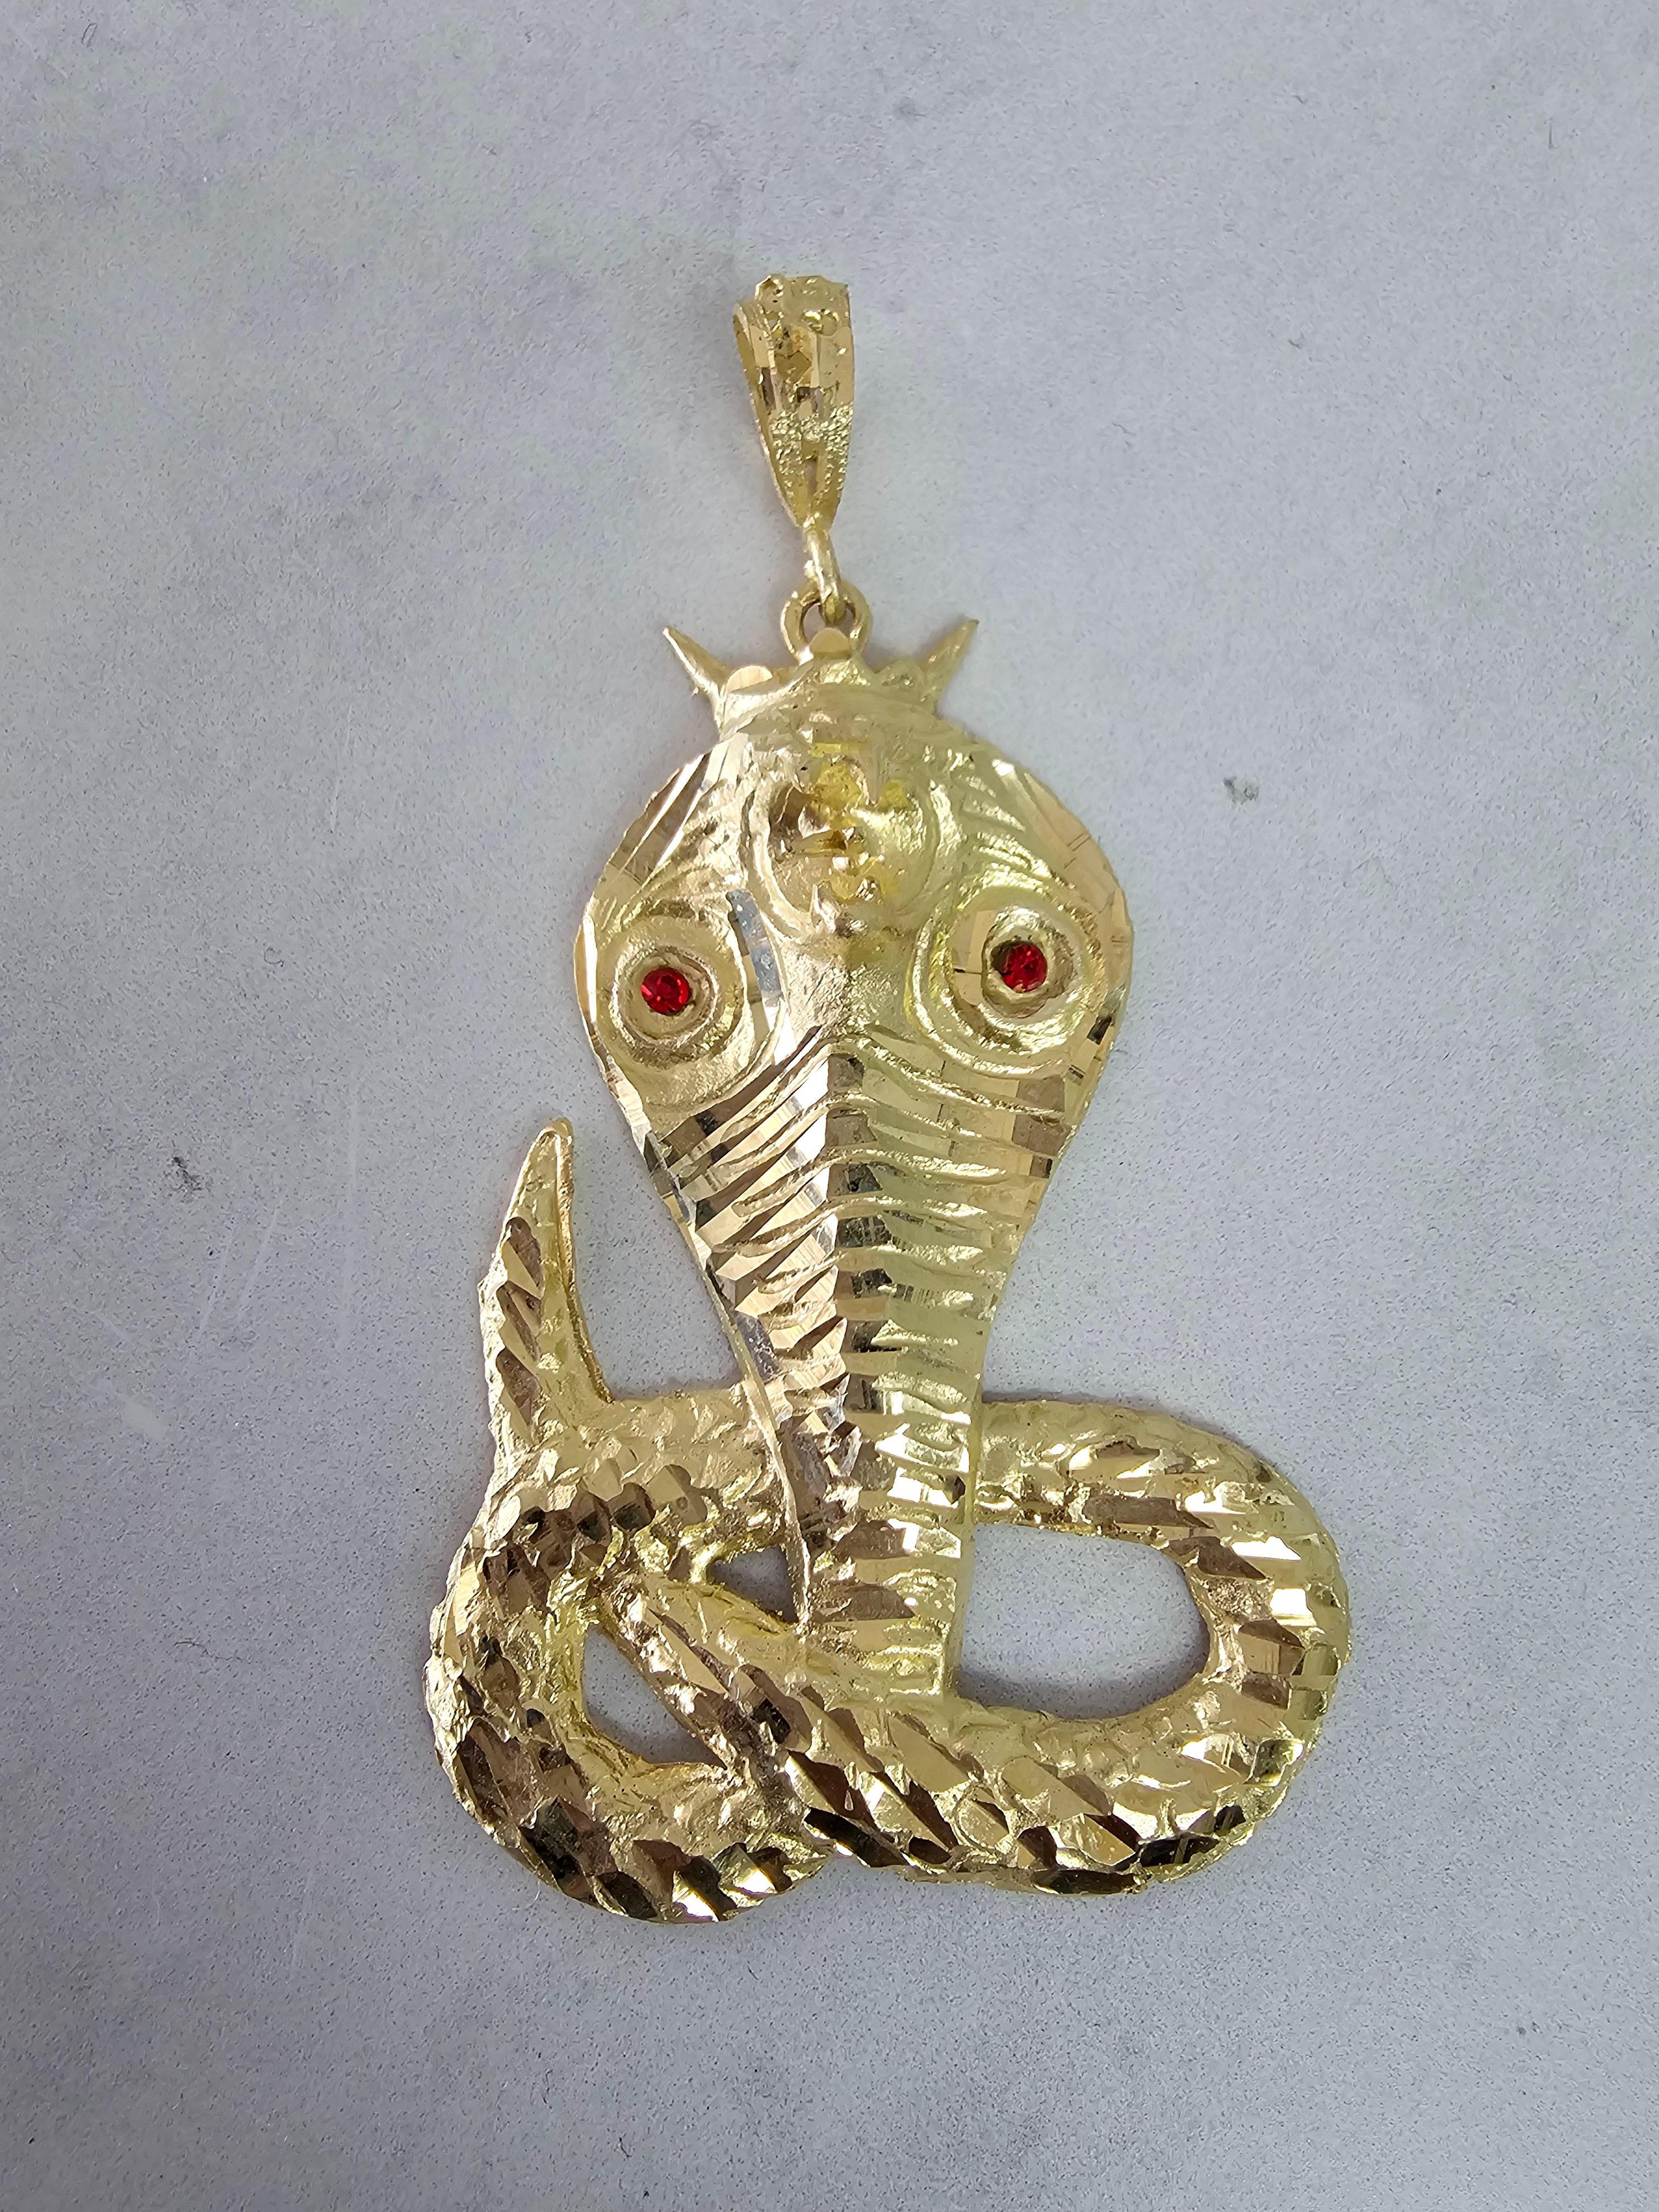 ♥ Product Summary ♥

Details: Cobra with Ruby Eyes with Diamond Cuts
Metal: 10K Yellow Gold
Dimensions: 74mm x 41mm
Weight: 13 grams